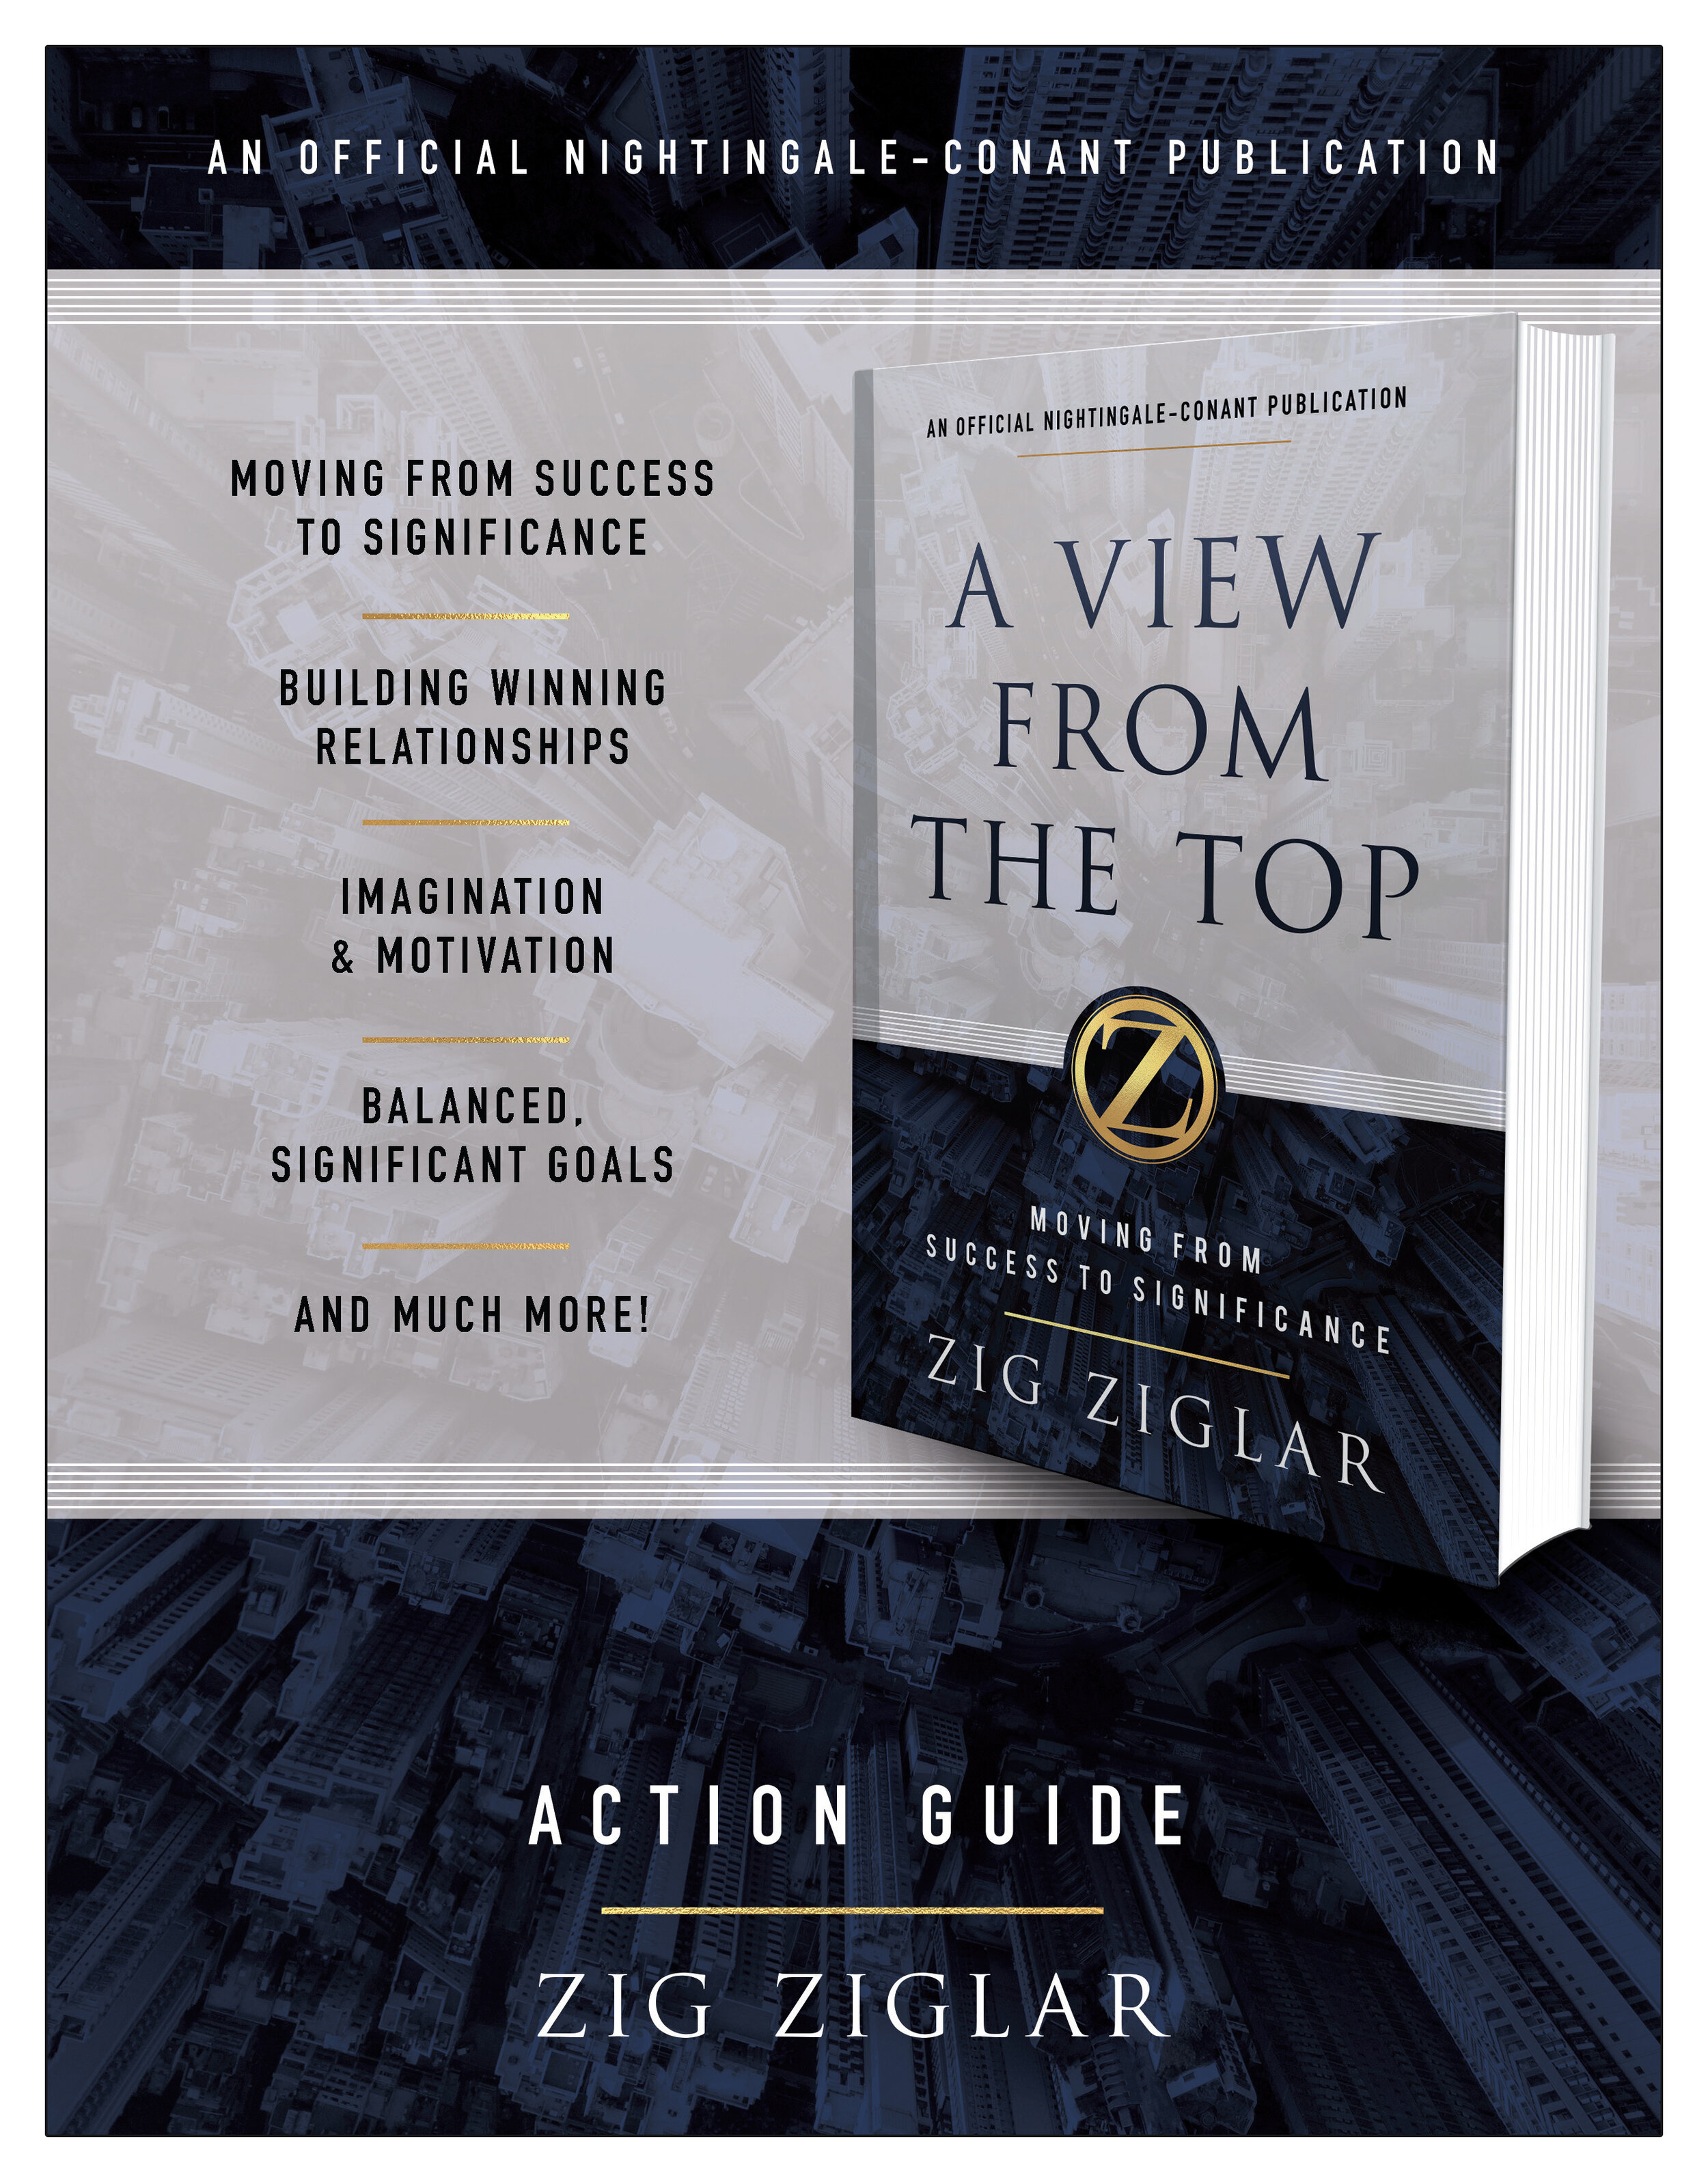 A_View_from_the_Top_Action_Guide.jpg